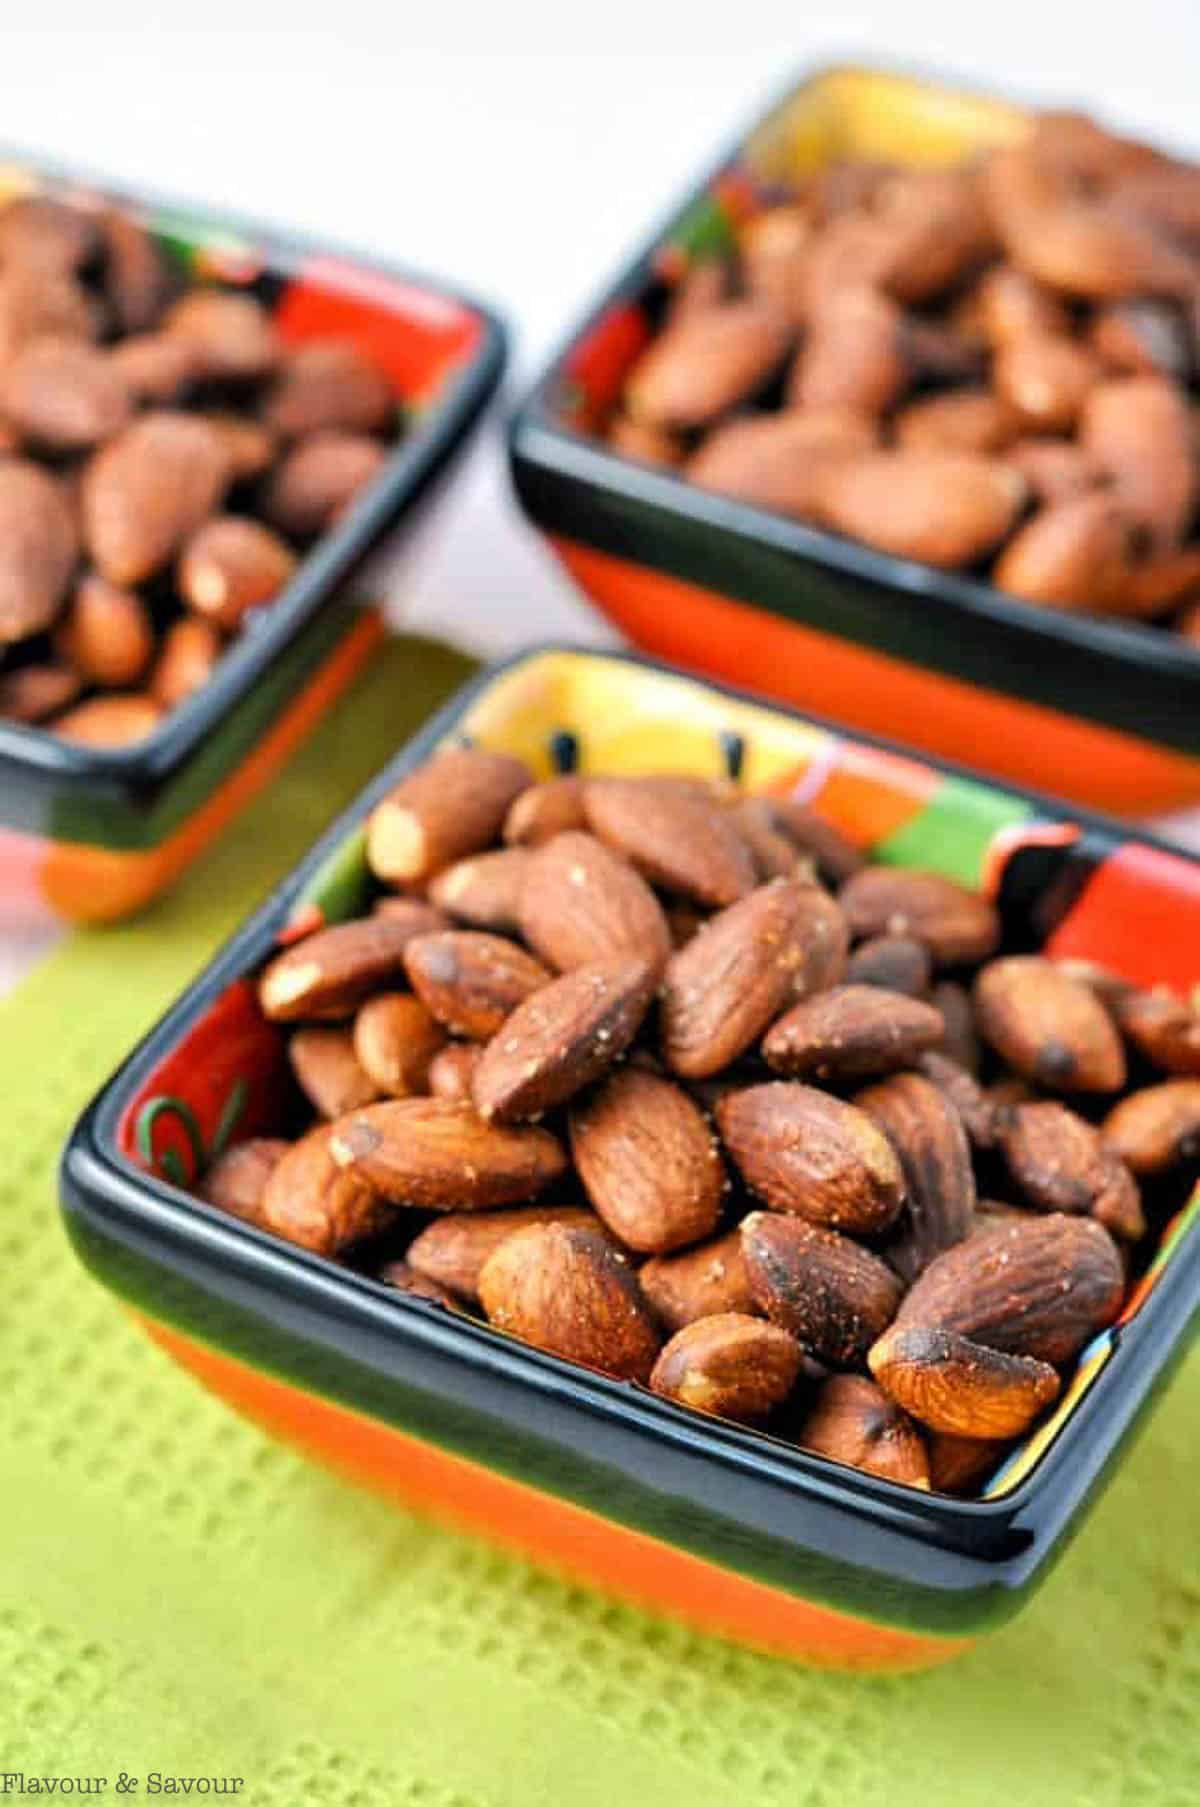 small bowls filled with Spanish spiced almonds